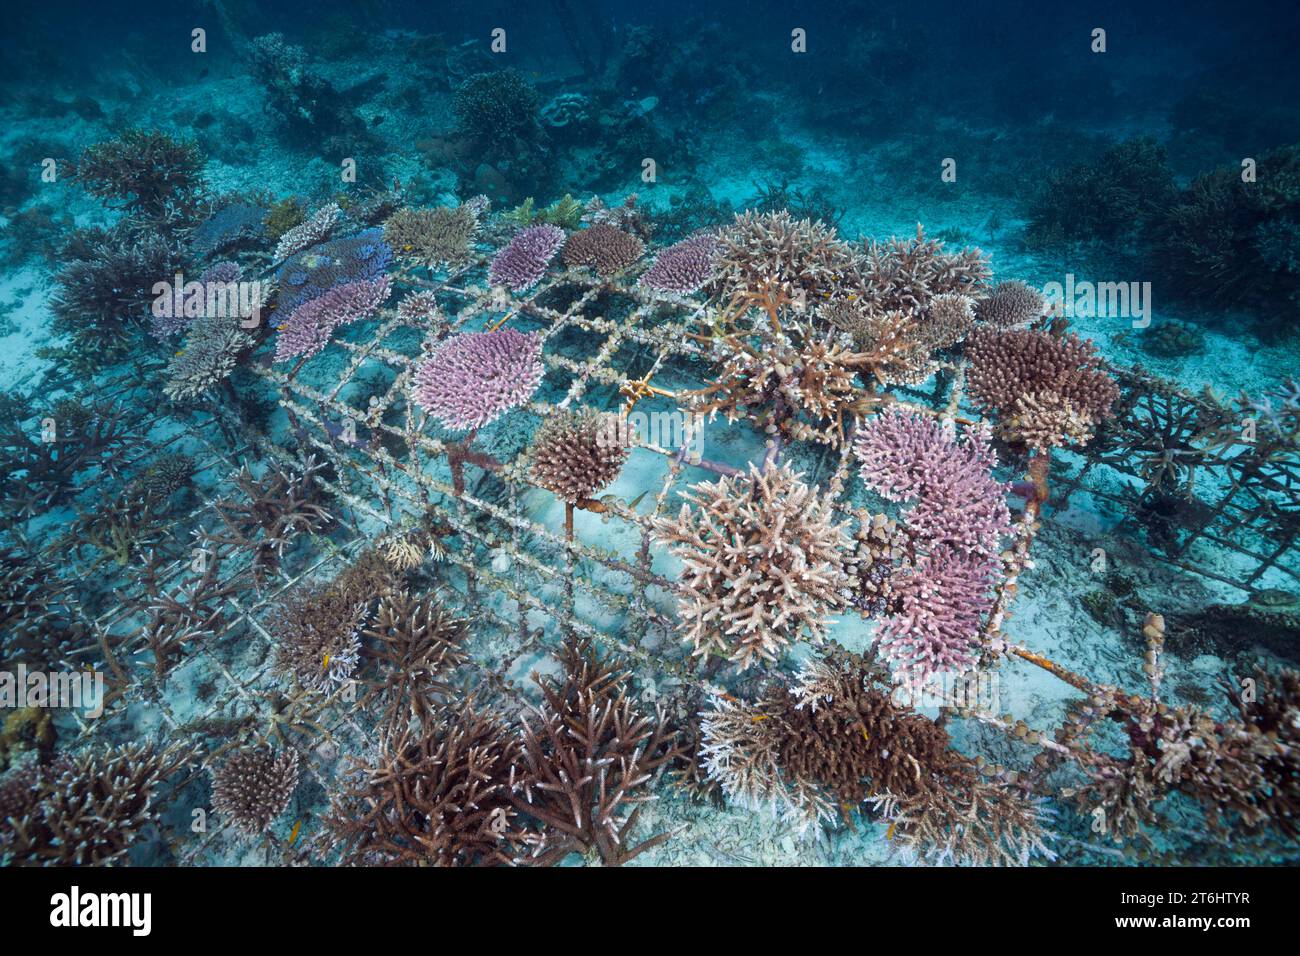 Coral Gardening Project, Raja Ampat, West Papua, Indonesia Foto Stock